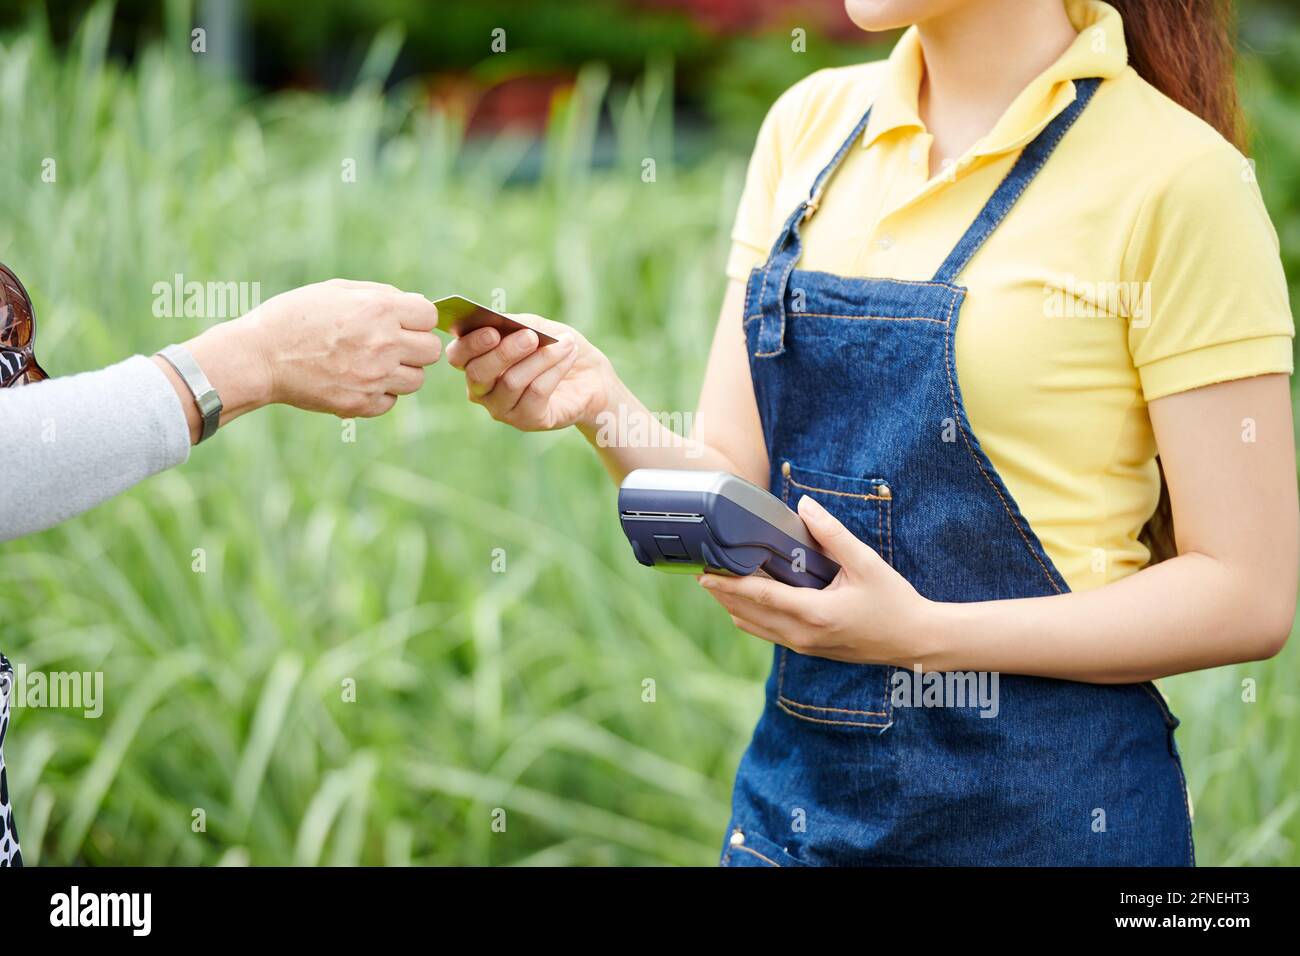 Hands of gardening center worker accepting payment from customer with credit card Stock Photo